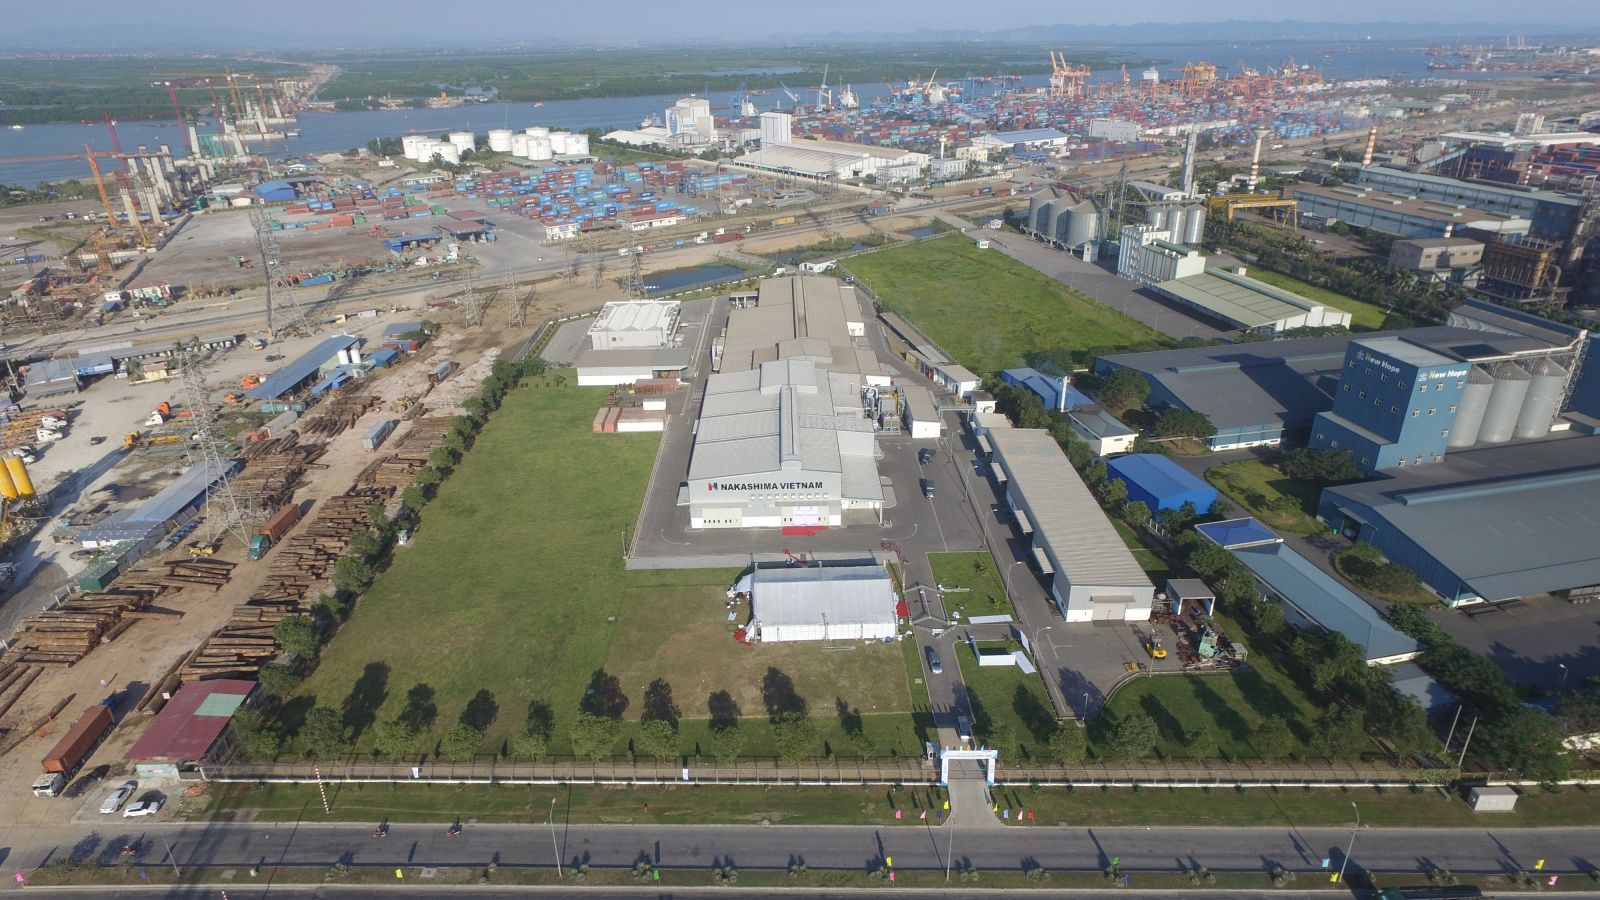 Hai Phong’s many advantages will prime them to become the new Northern key industrial hub.